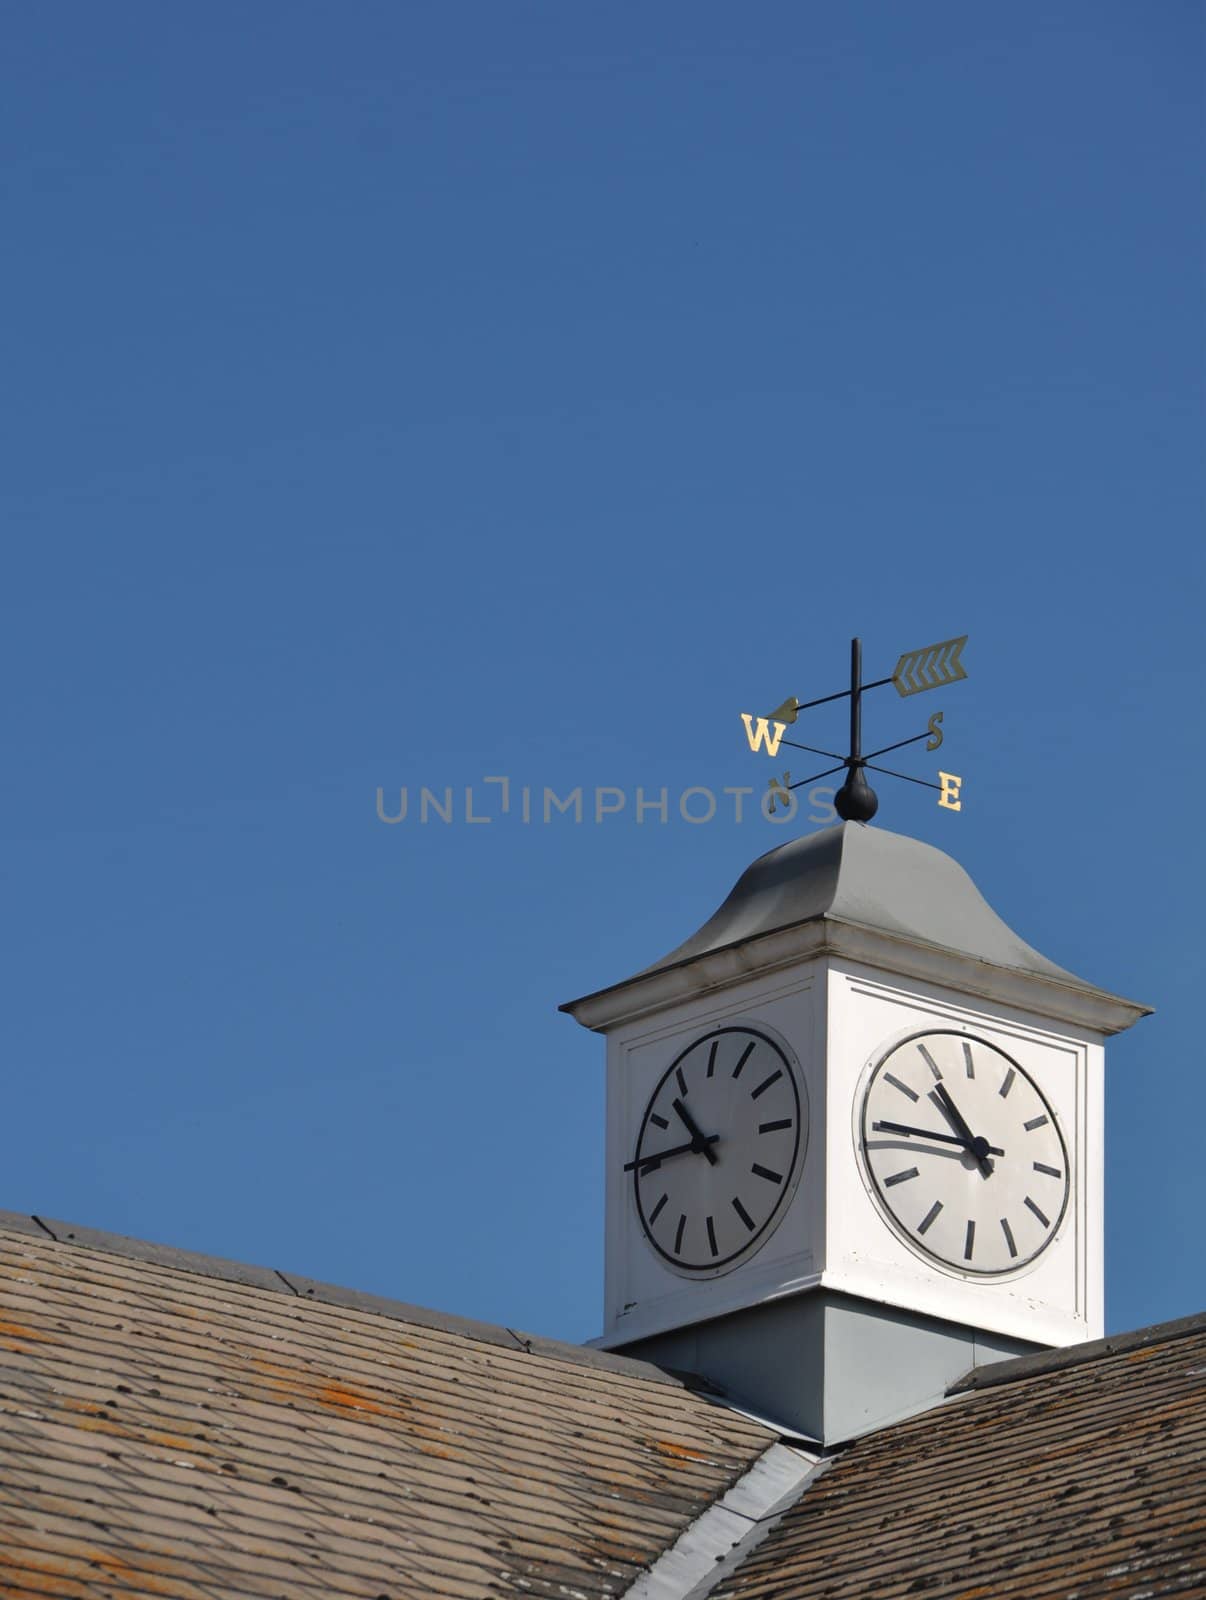 clock tower with weather vane on top of a building in Gloucester, England